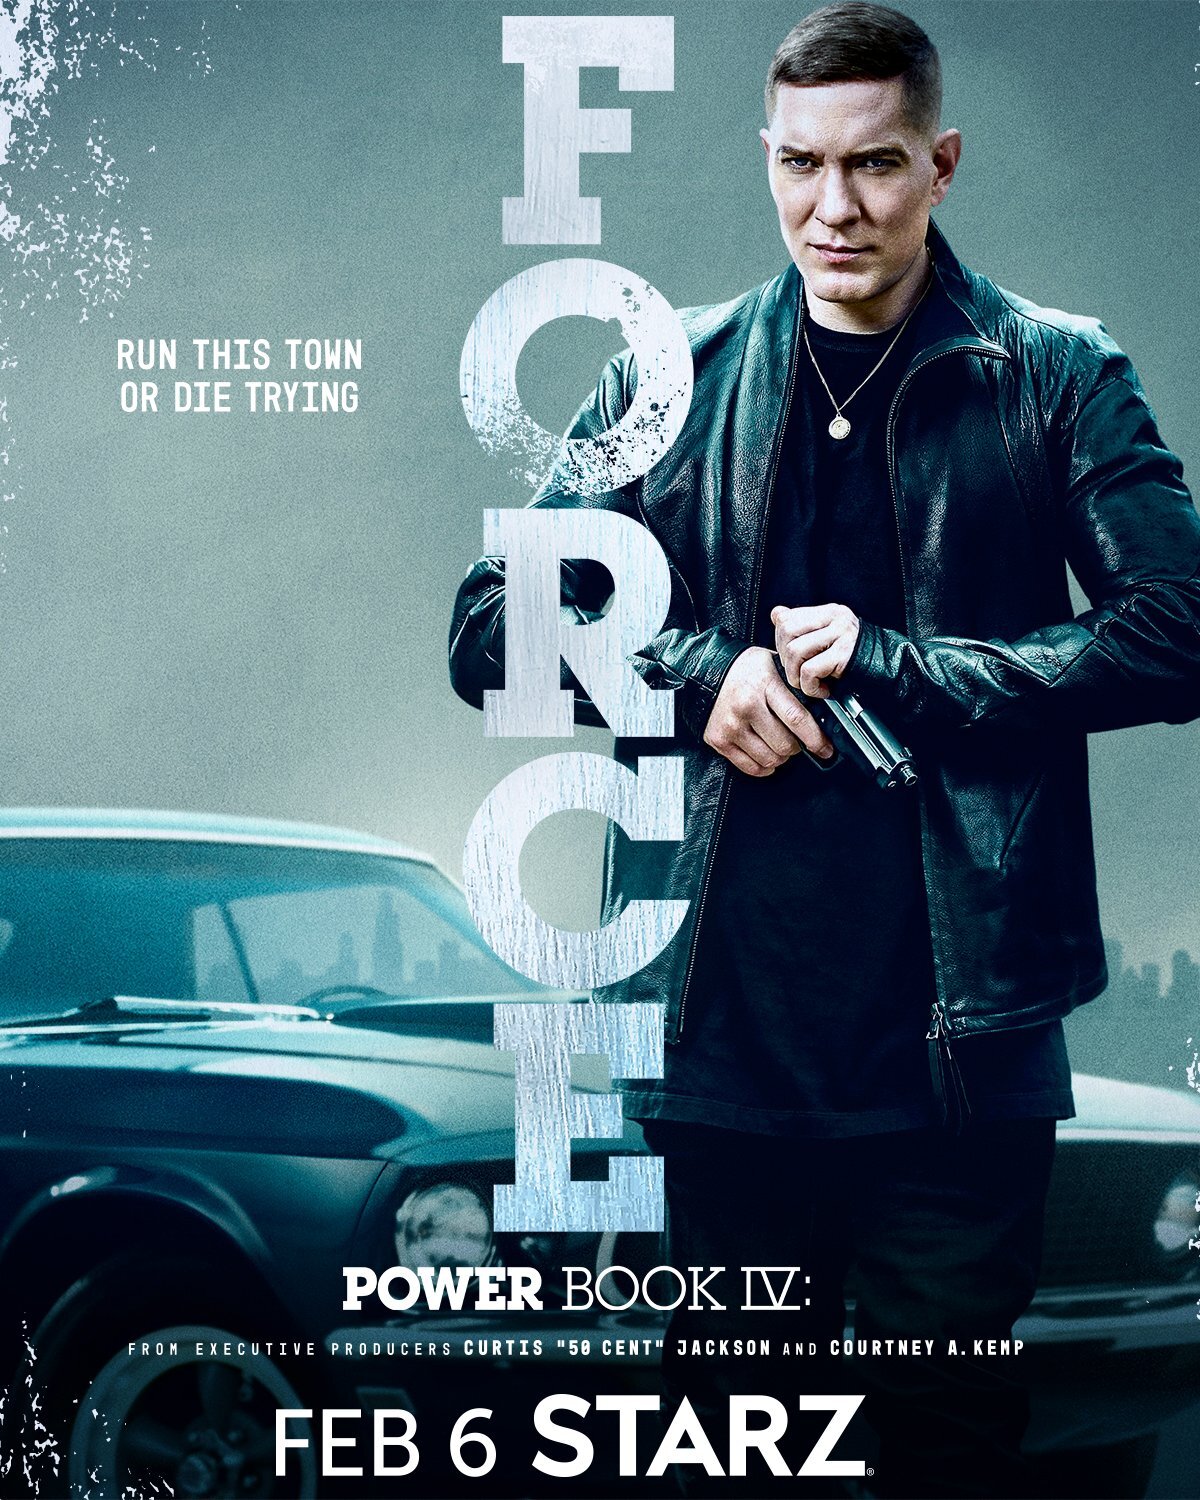 New Clip From Starz Original Series 'Power Book IV: Force' - Season 1, Episode 3